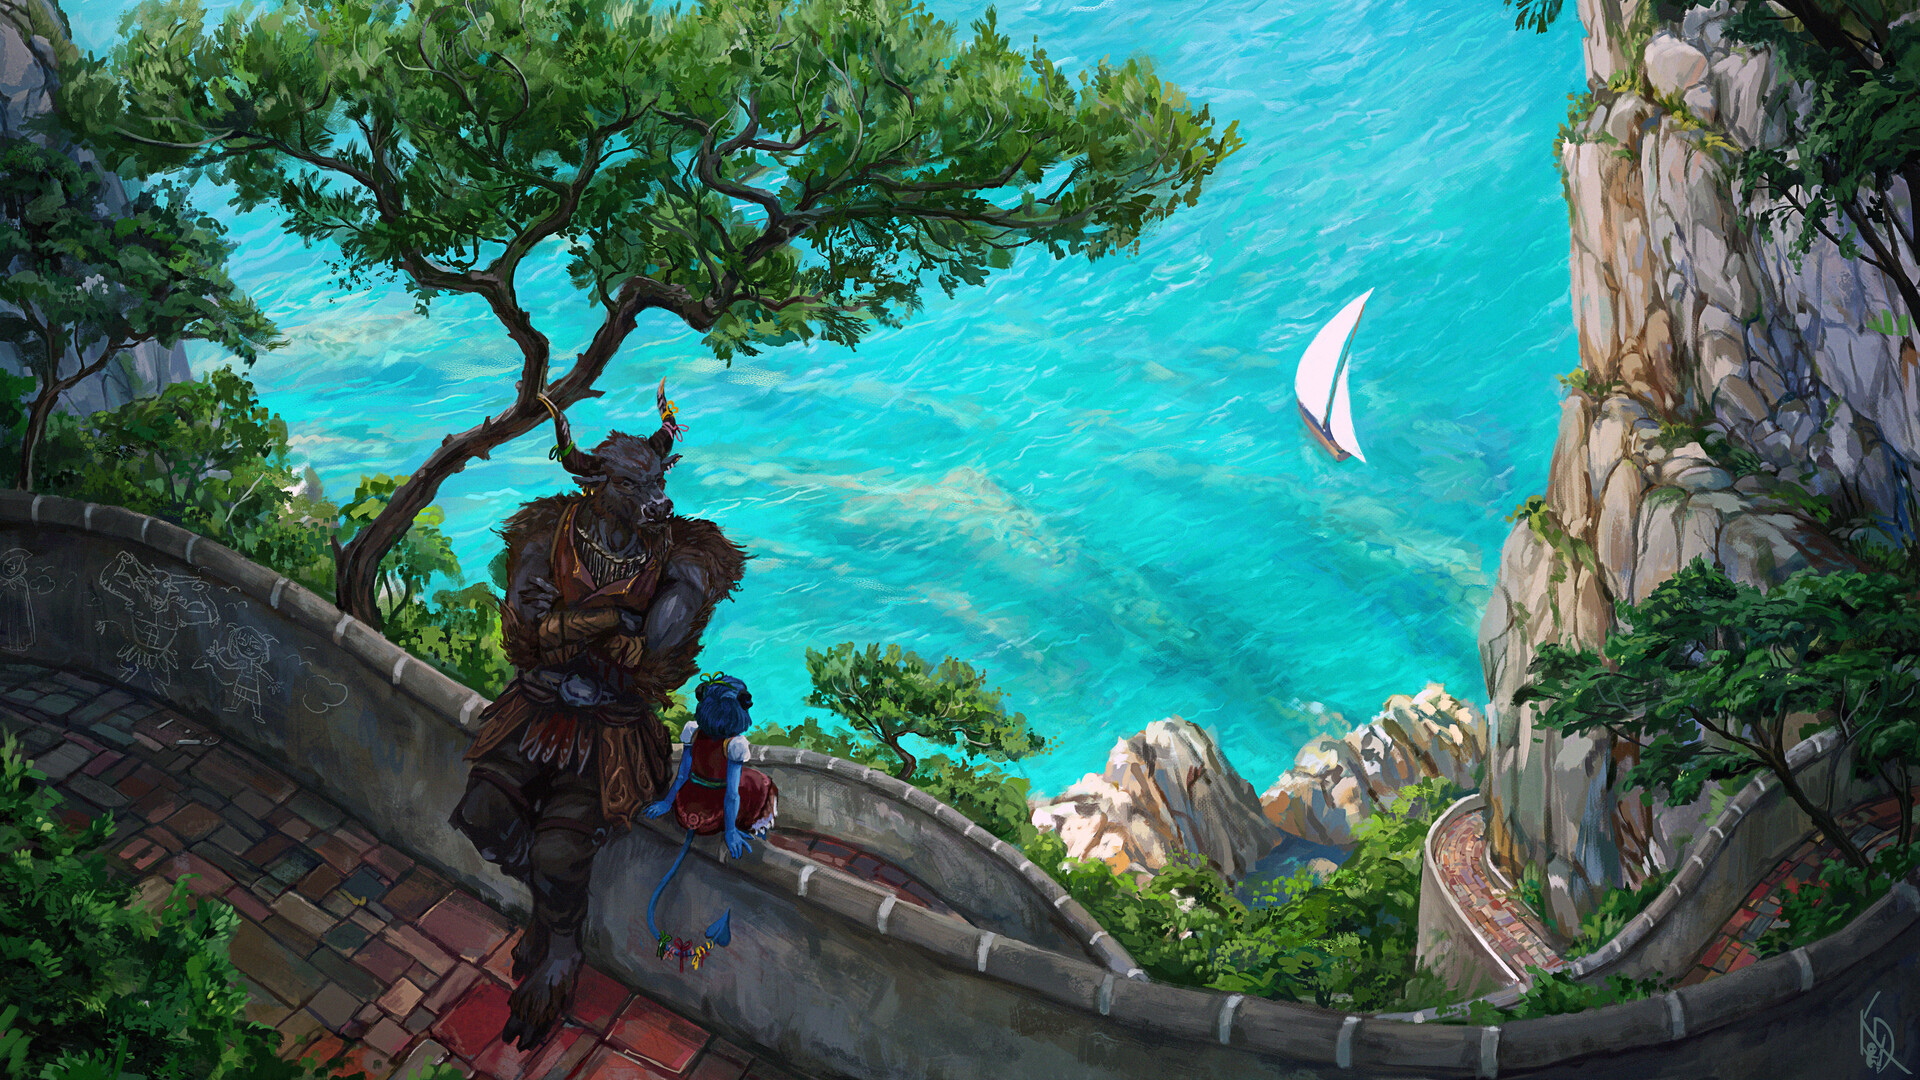 General 1920x1080 digital art trees water sailboats tail Minotaur road high angle Critical Role